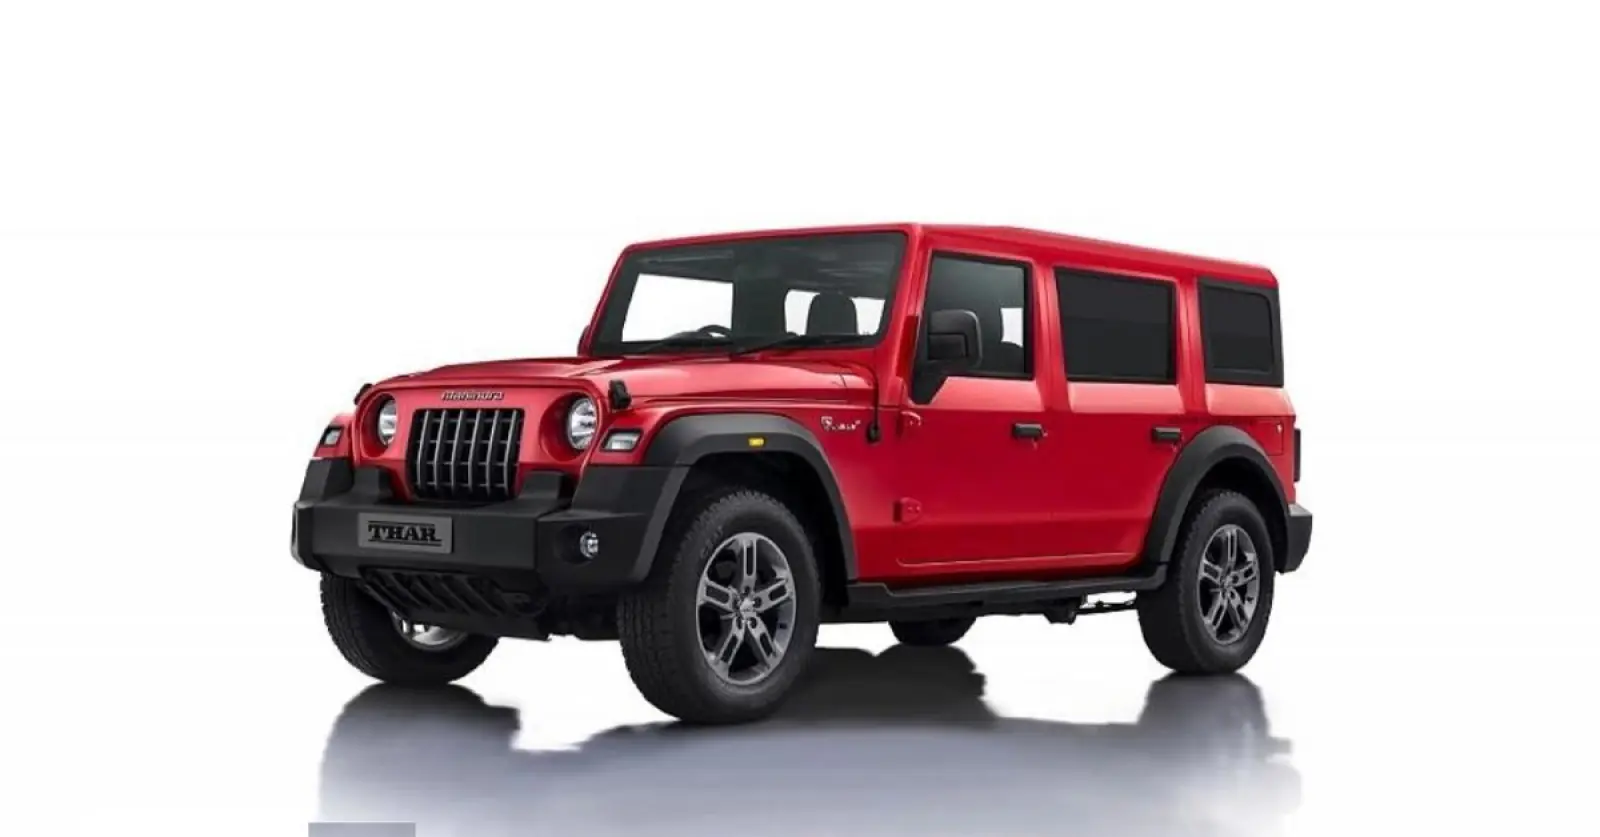 Mahindra Thar 5-Door, an off-road SUV that may be unveiled on August 15, will be very different from the previous model